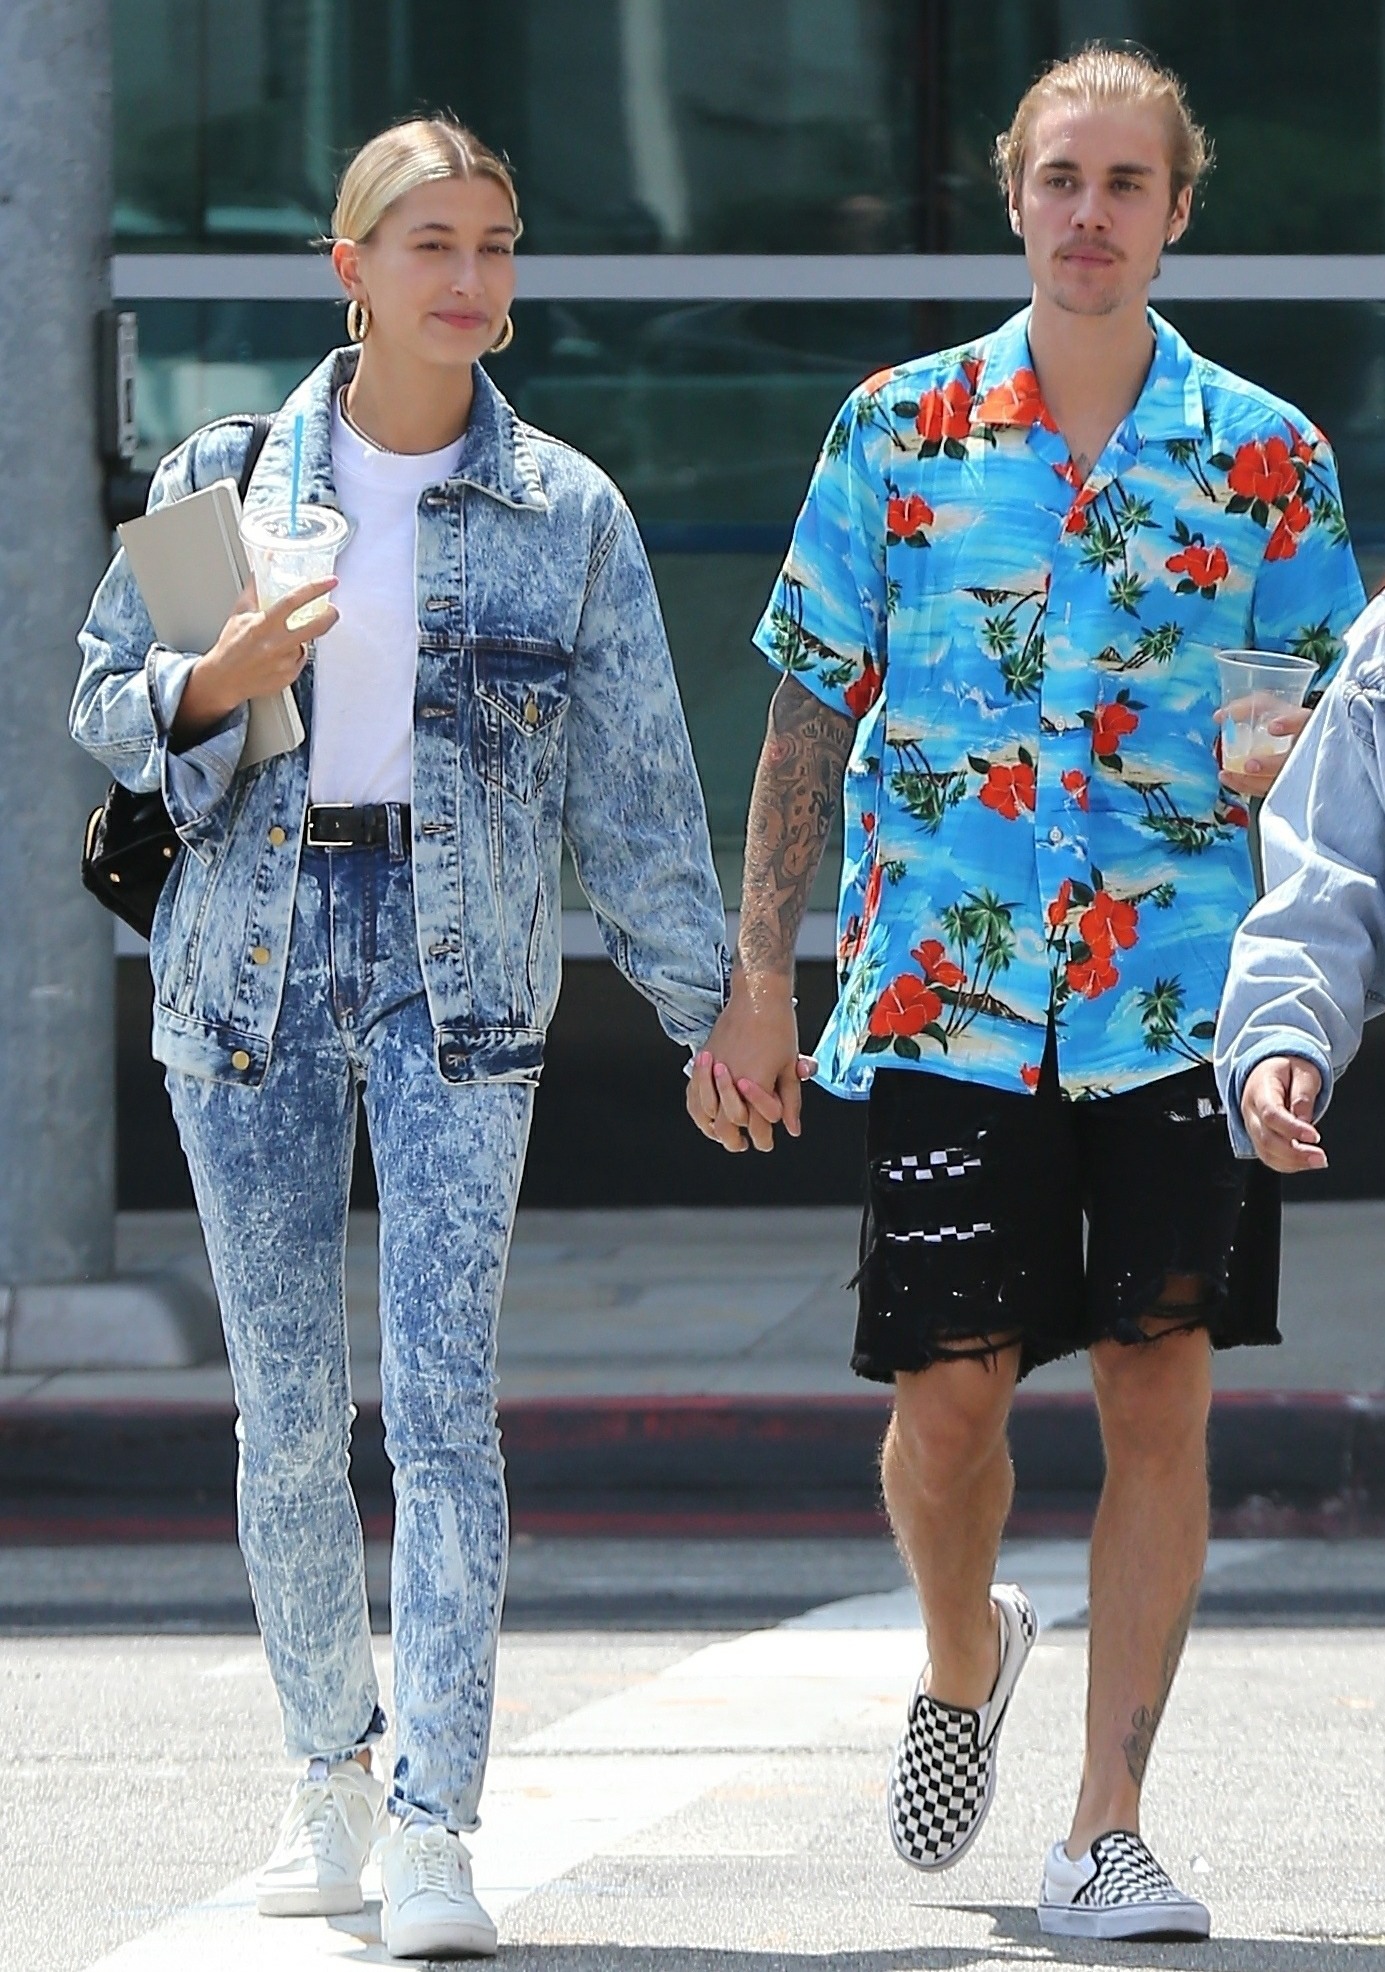 Justin Bieber enjoys a morning out with his fiancee Hailey Baldwin and friends